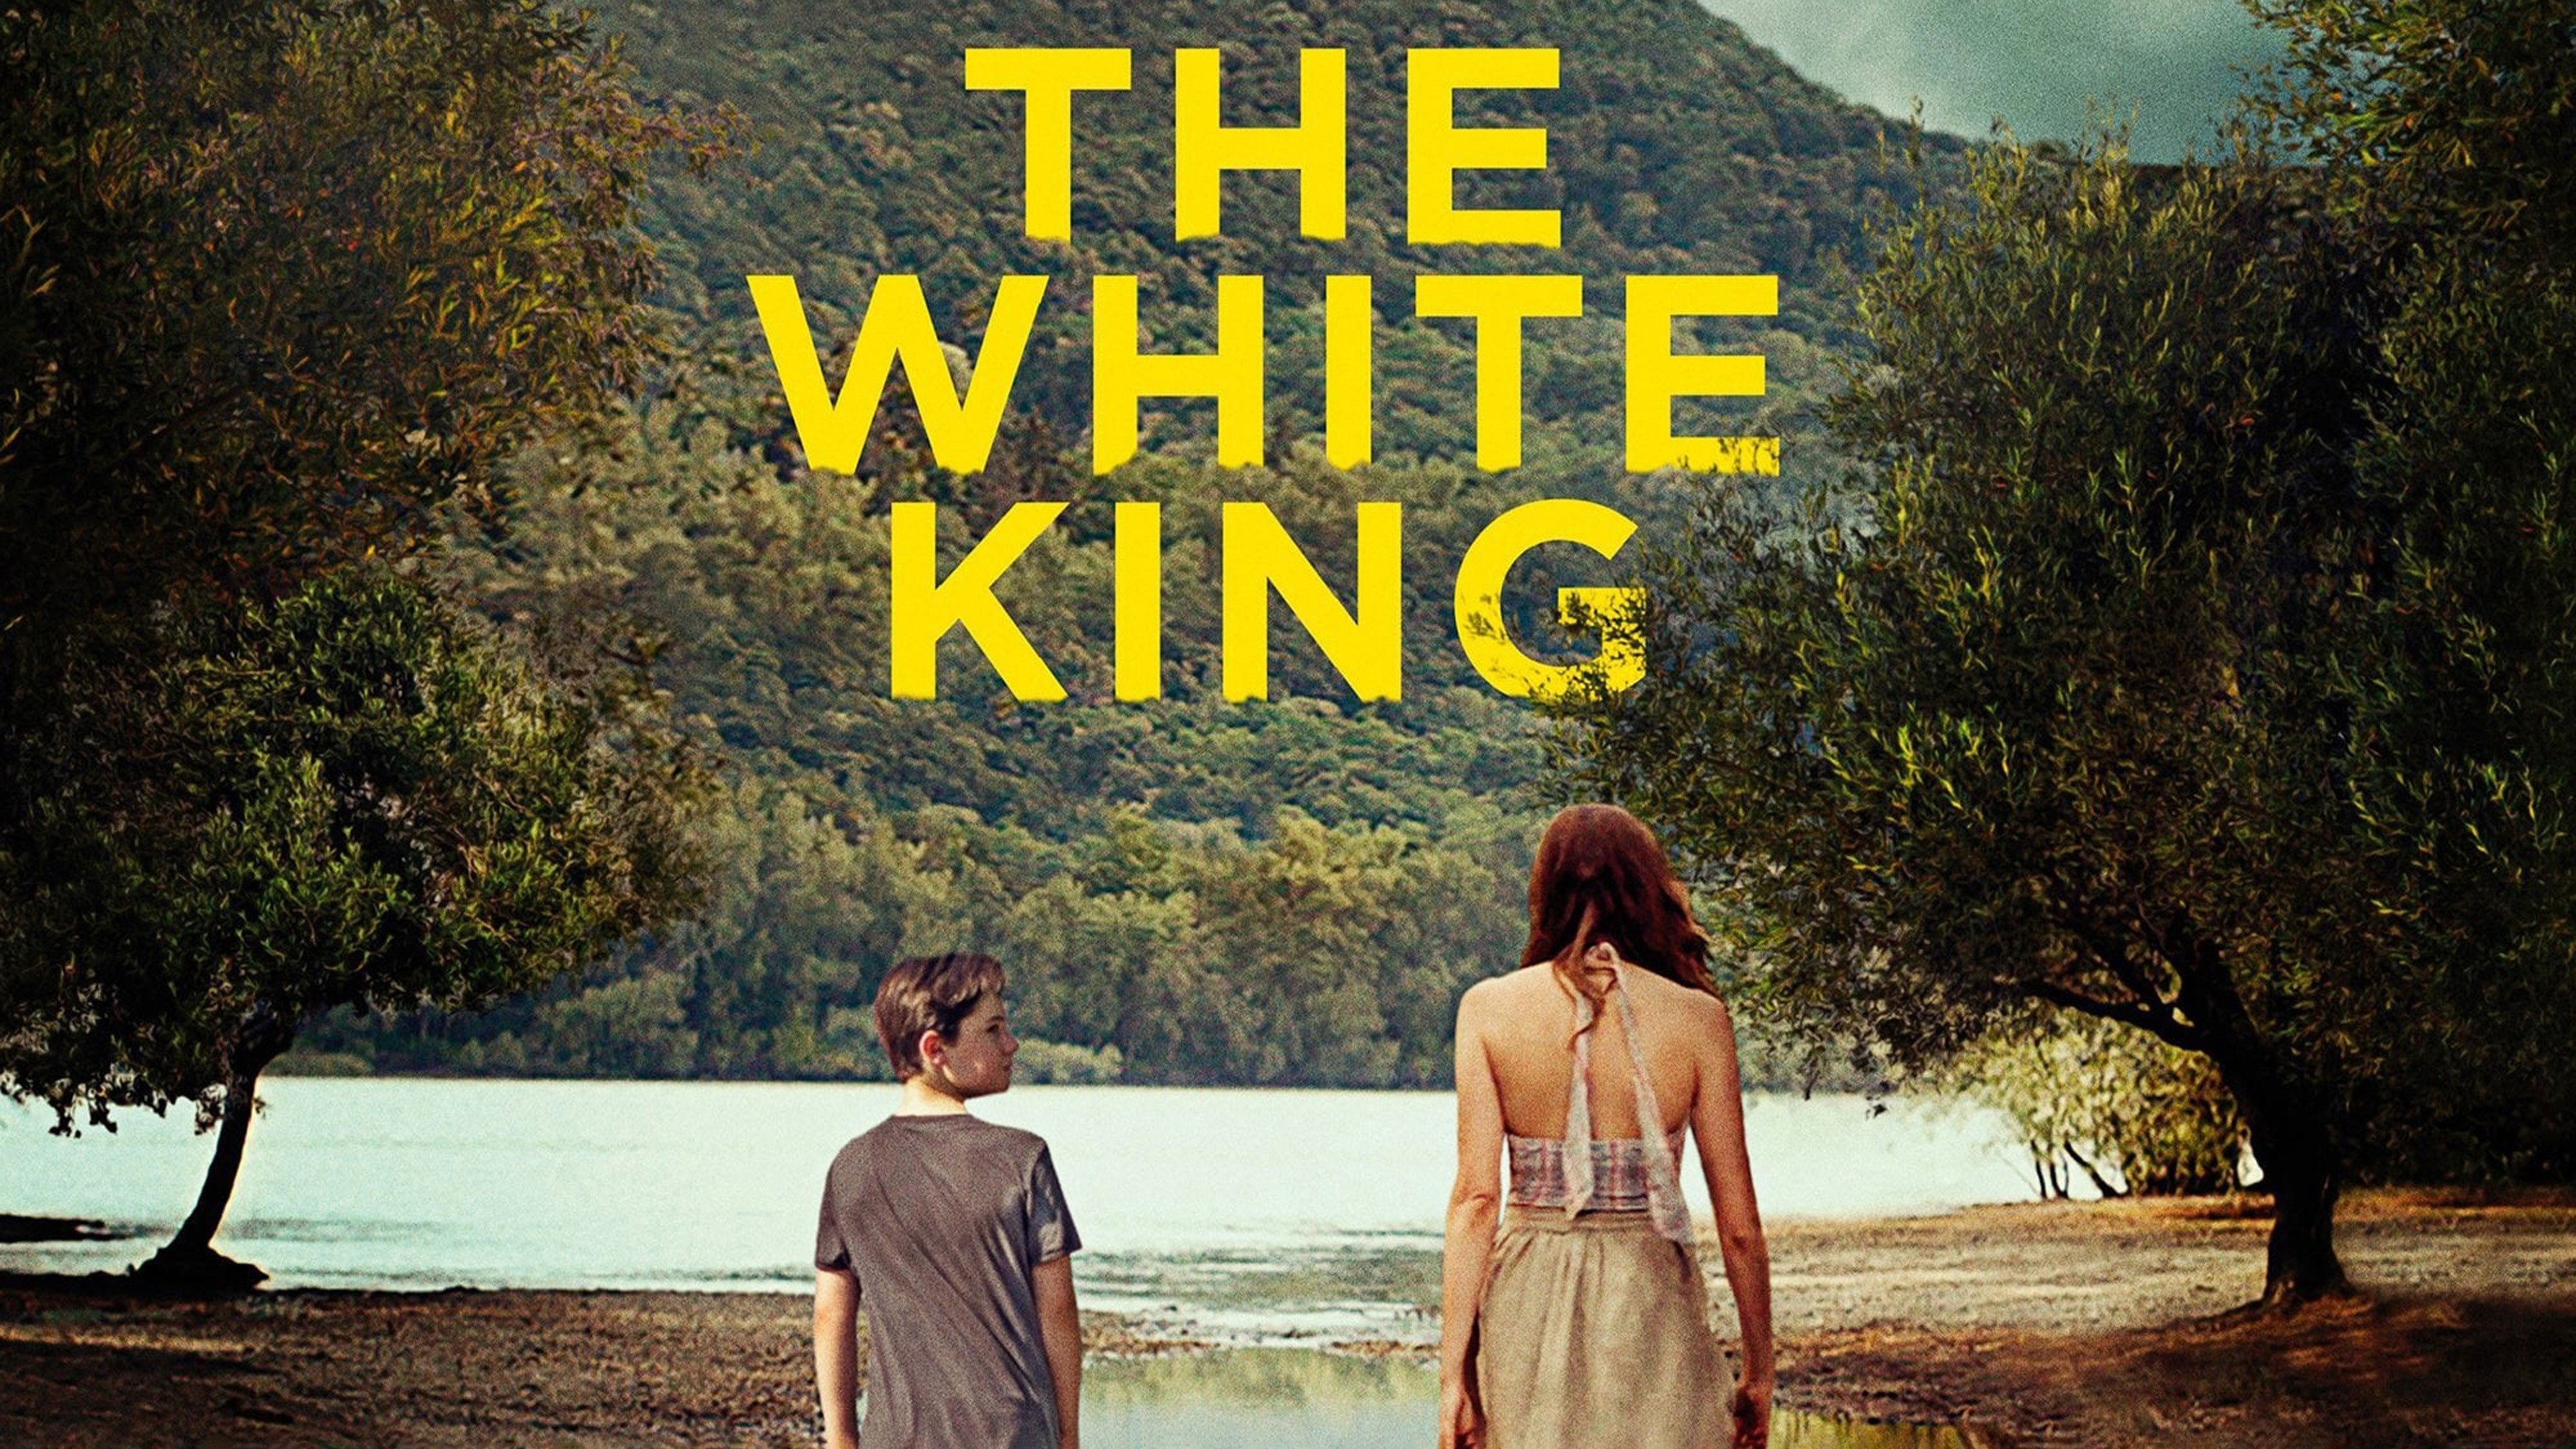 The White King Trailer 1 Trailers & Videos Rotten Tomatoes